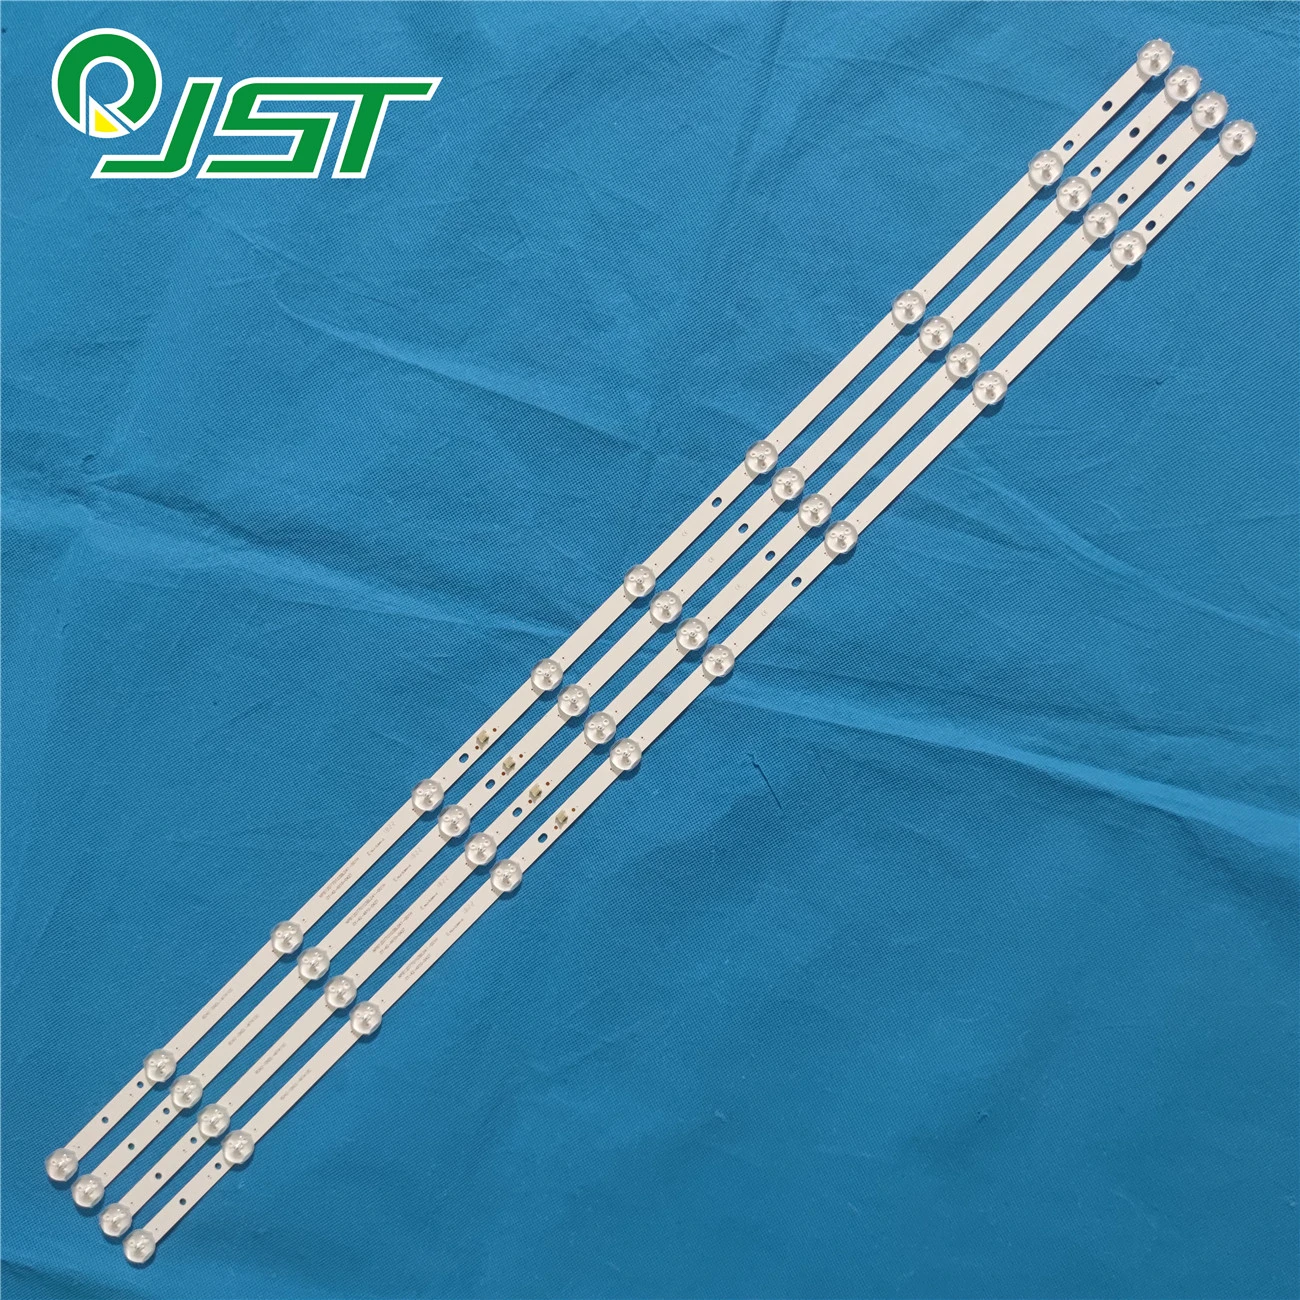 240v led strip lights 4pcs LED LB1010 NPB12D770103BL041-001H CY-42-4X10-0427 8D42-DNDL-M7410C 08-42C4X10-770-M15 BD42-DNYF-MN410C YF-A12N003KEUD-001 light strips for room